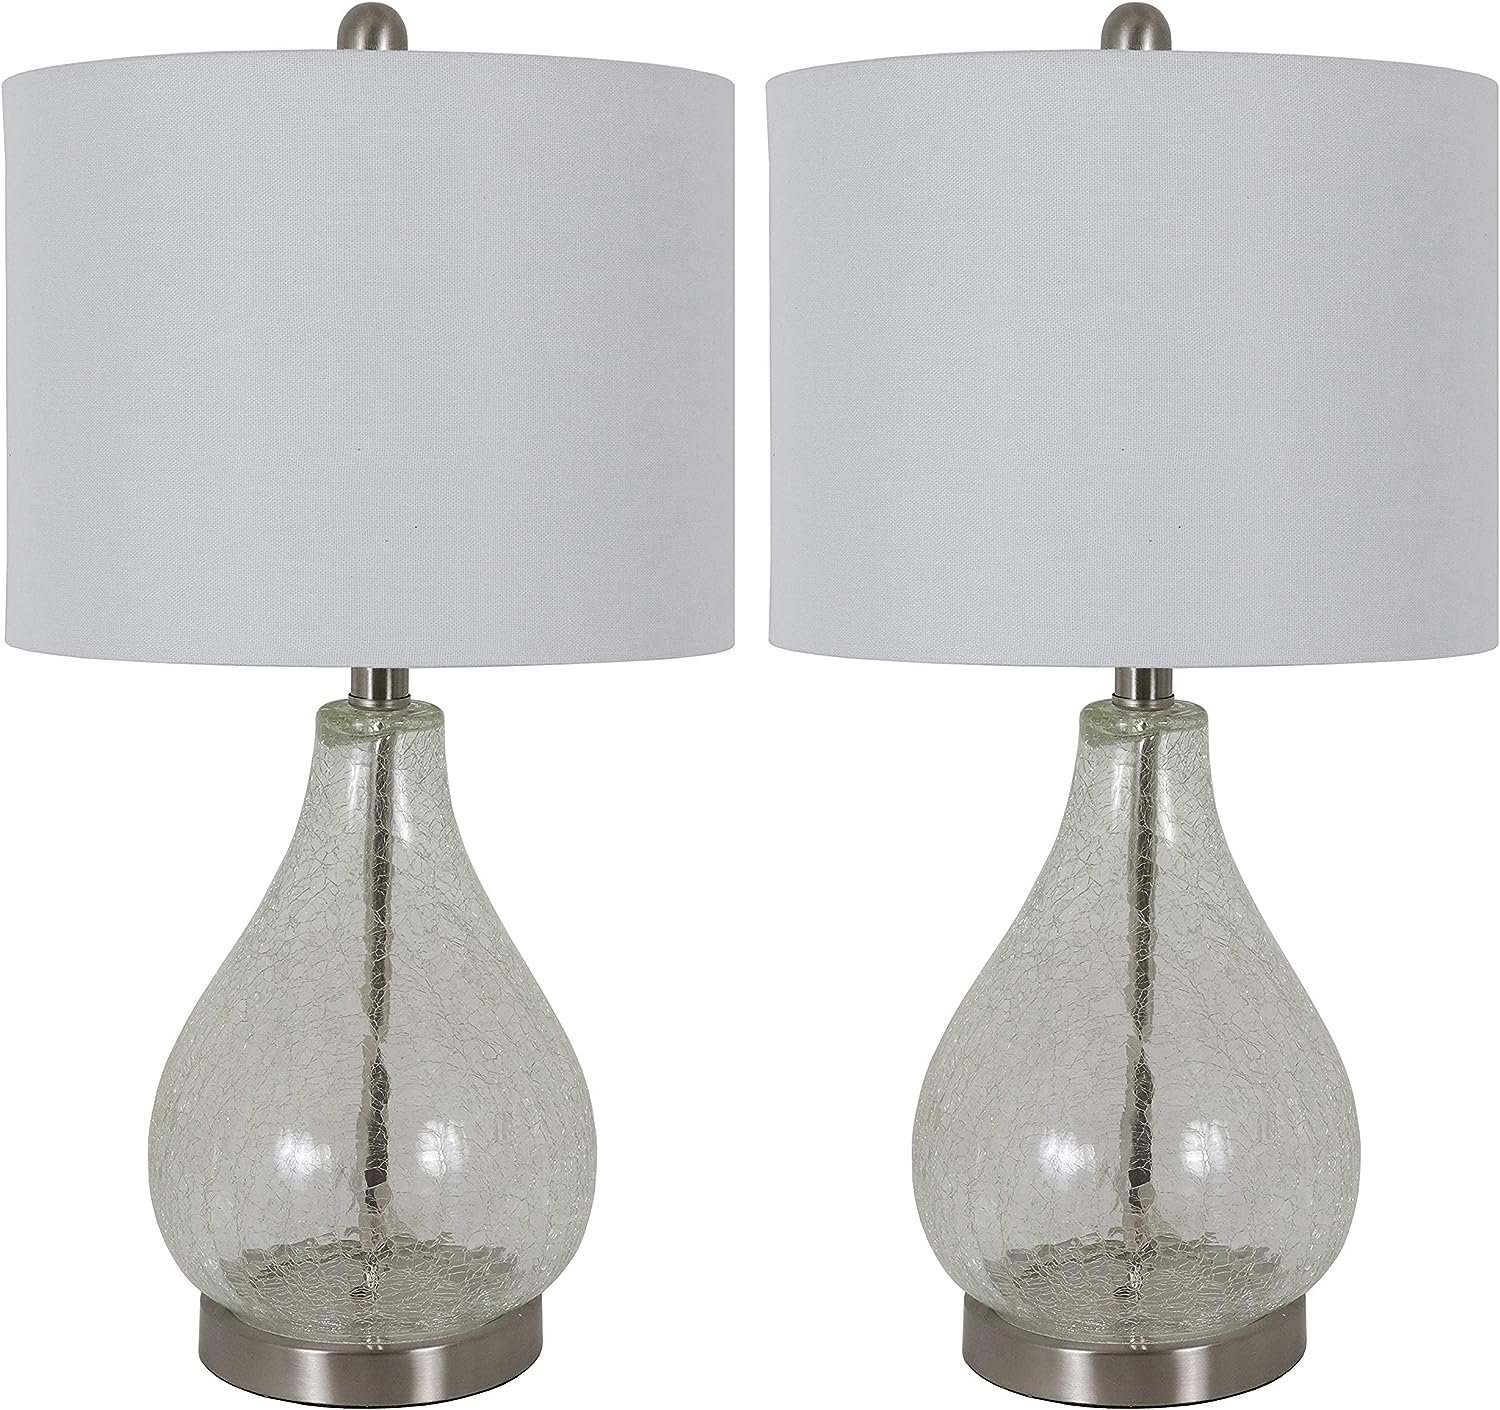 Decor Therapy Crackled Teardrop Table Lamps, Set of 2, Clear